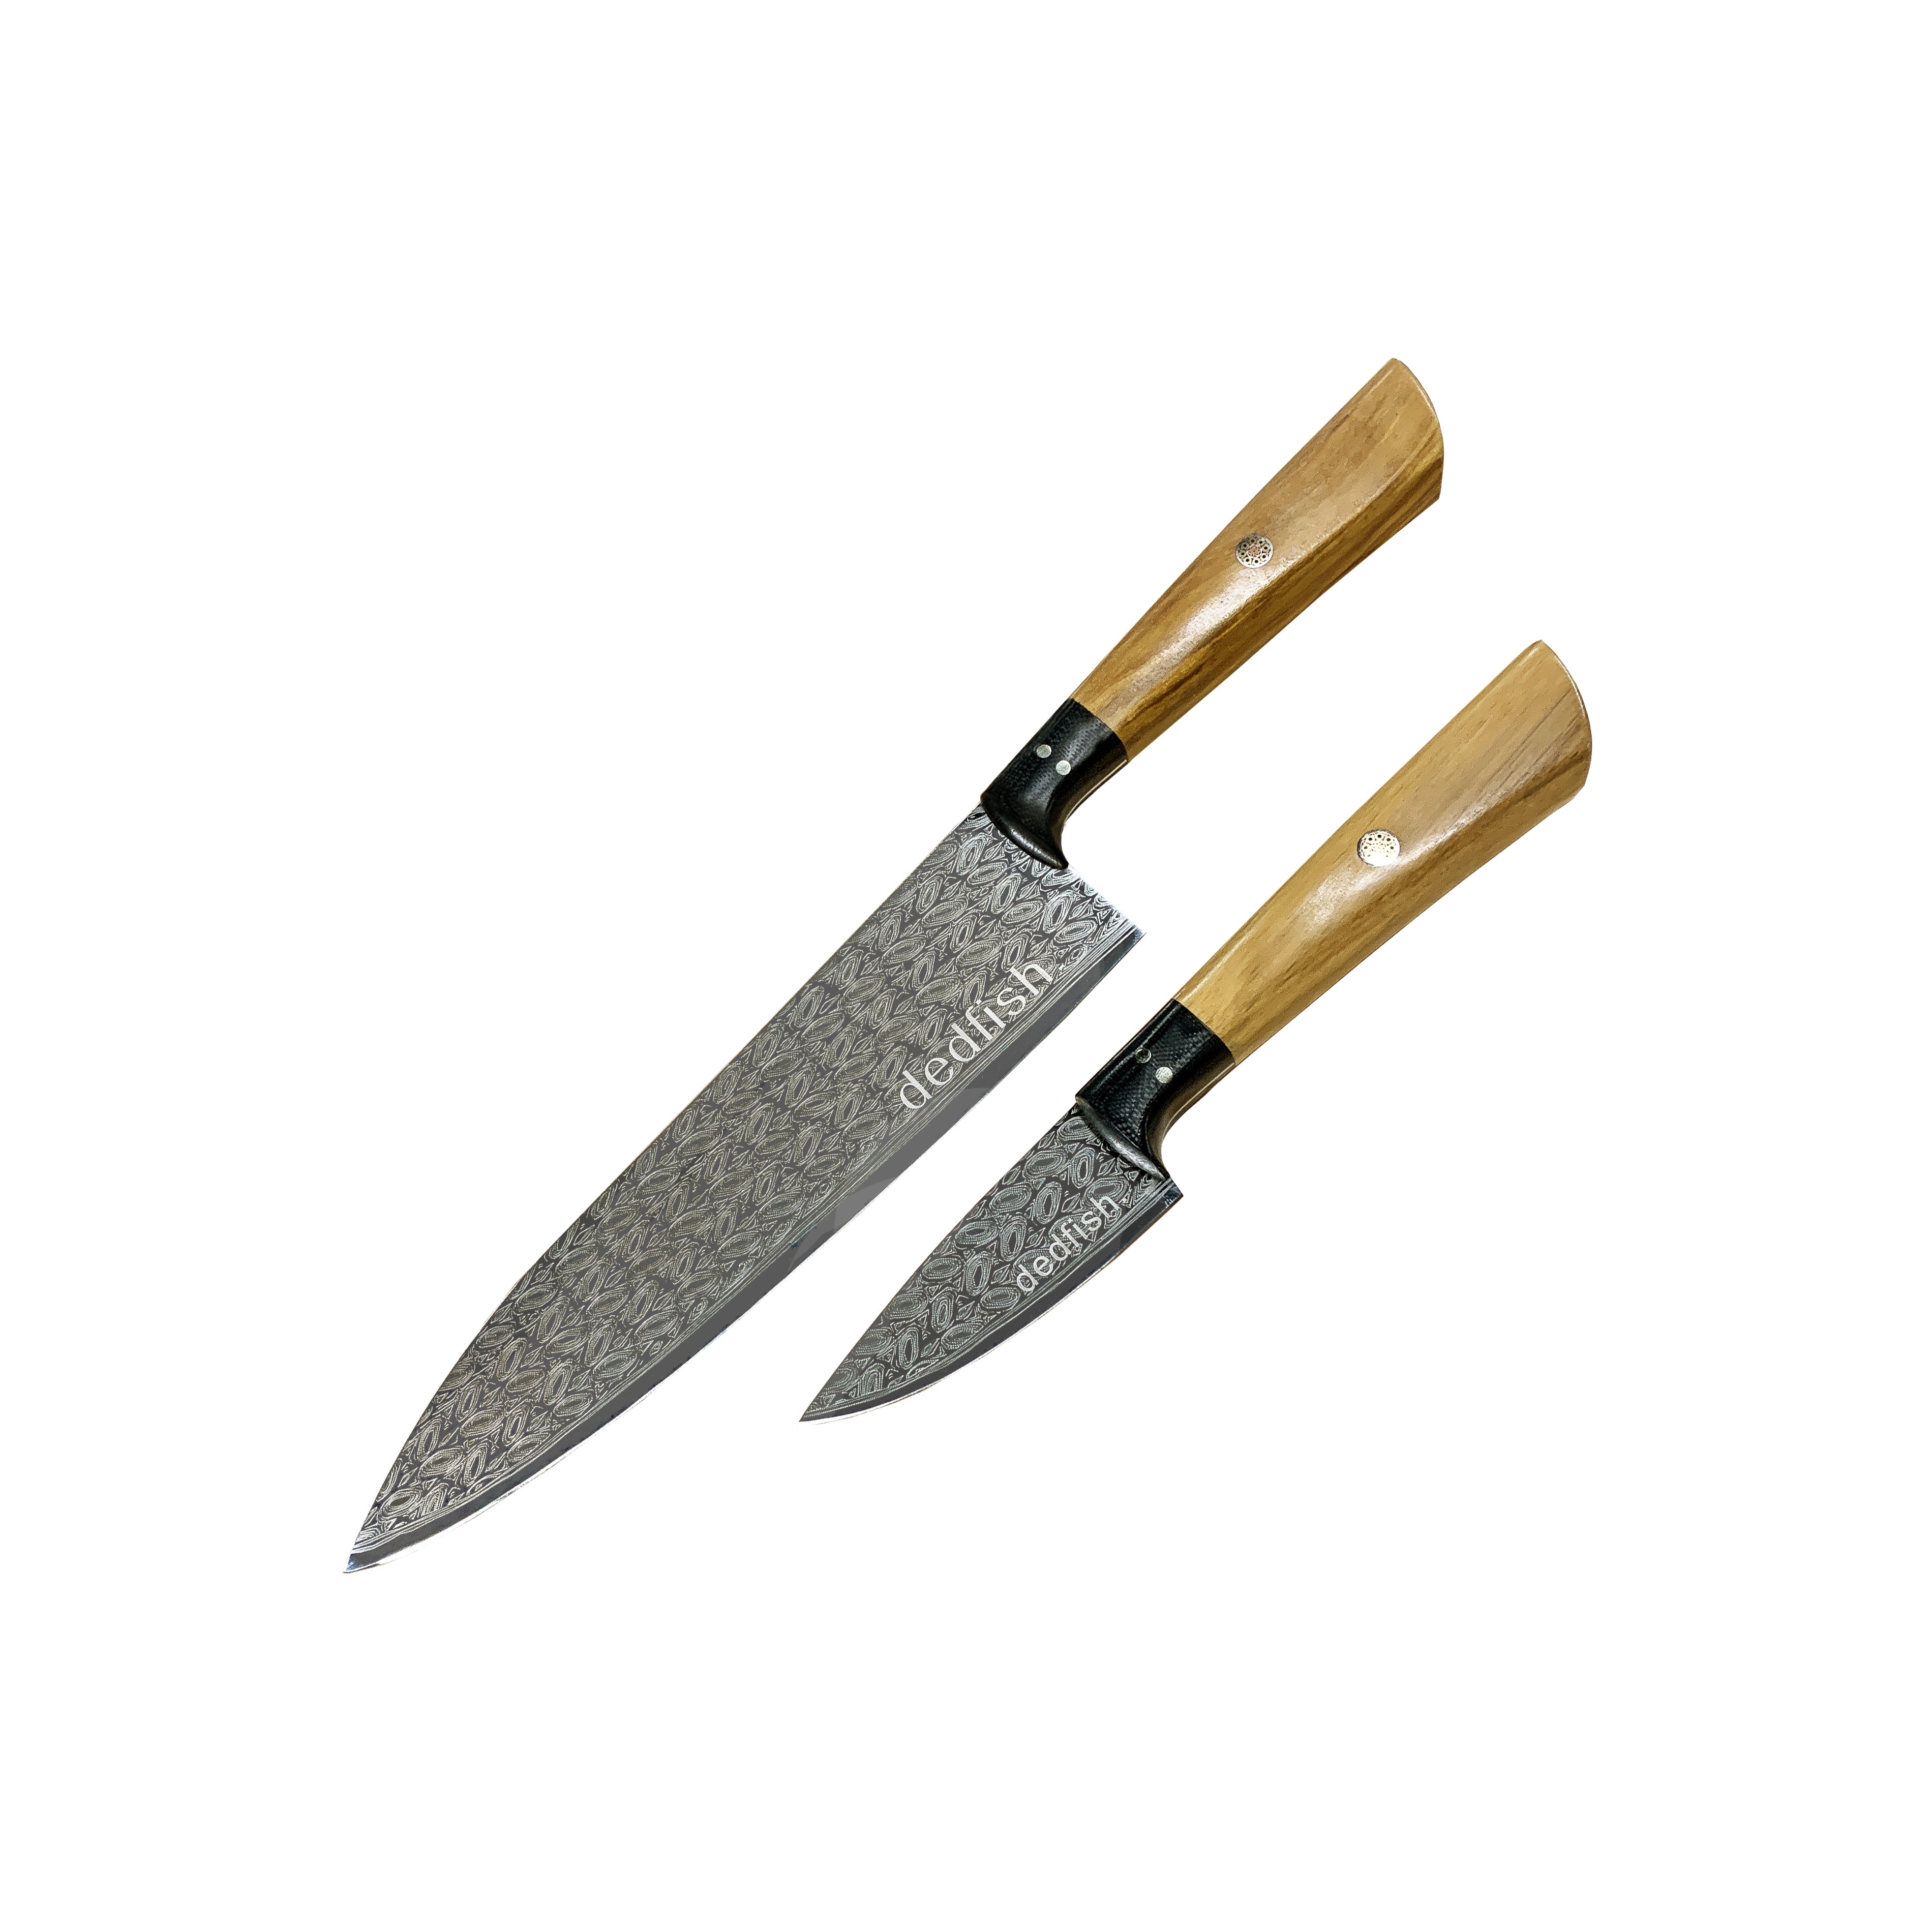 Dedfish Co. Kitchen Knife Set - Laser Etched Stainless Steel with Oliv